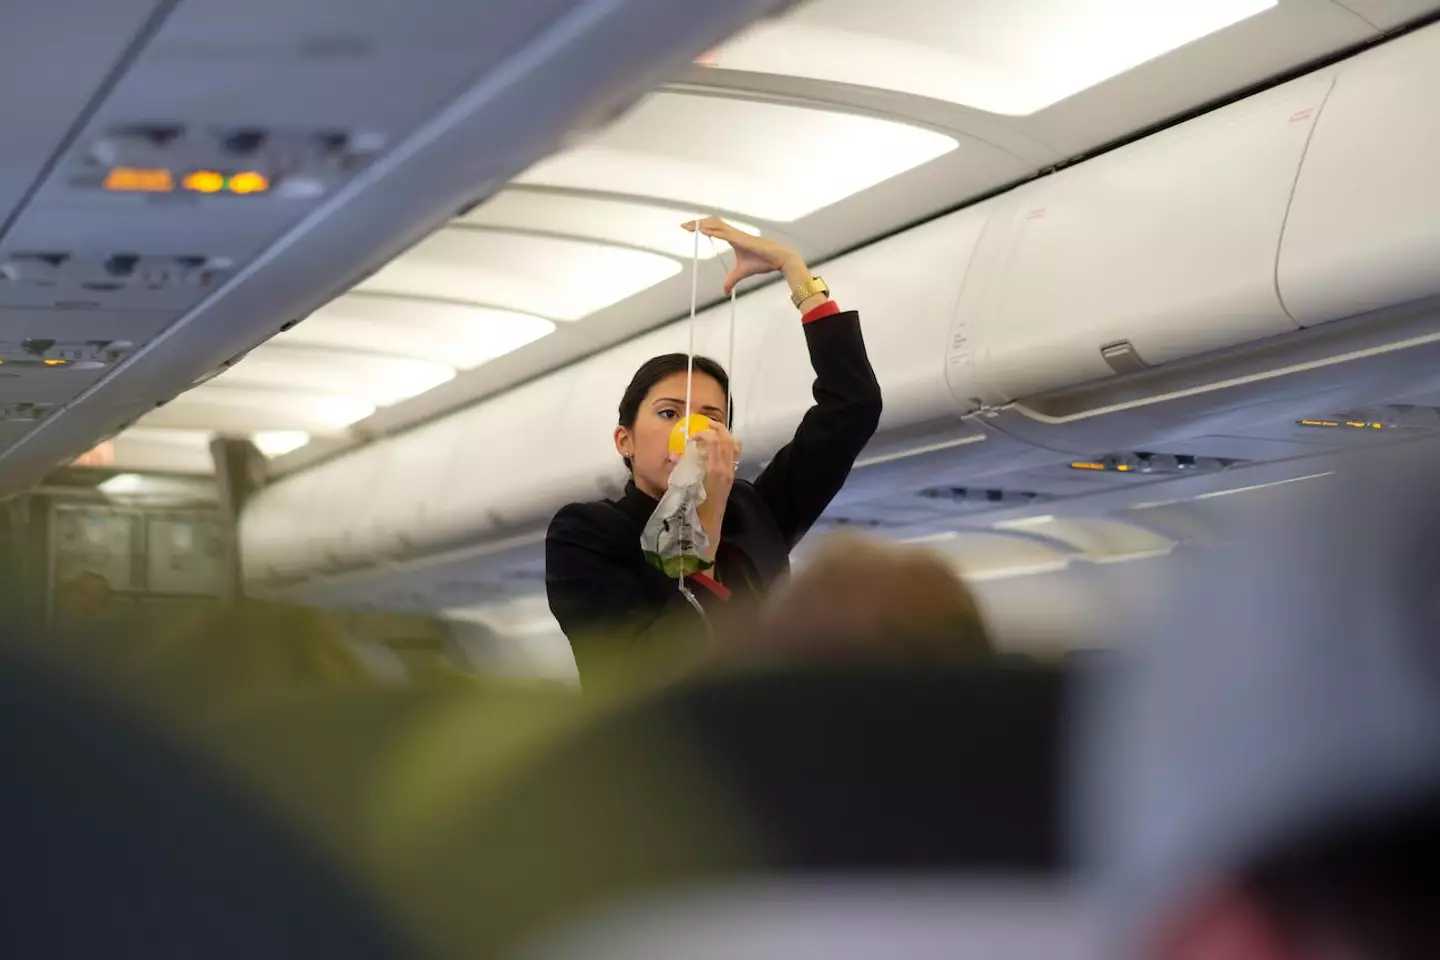 When the flight attendant tells you to put on your own oxygen mask before helping others - you best listen.